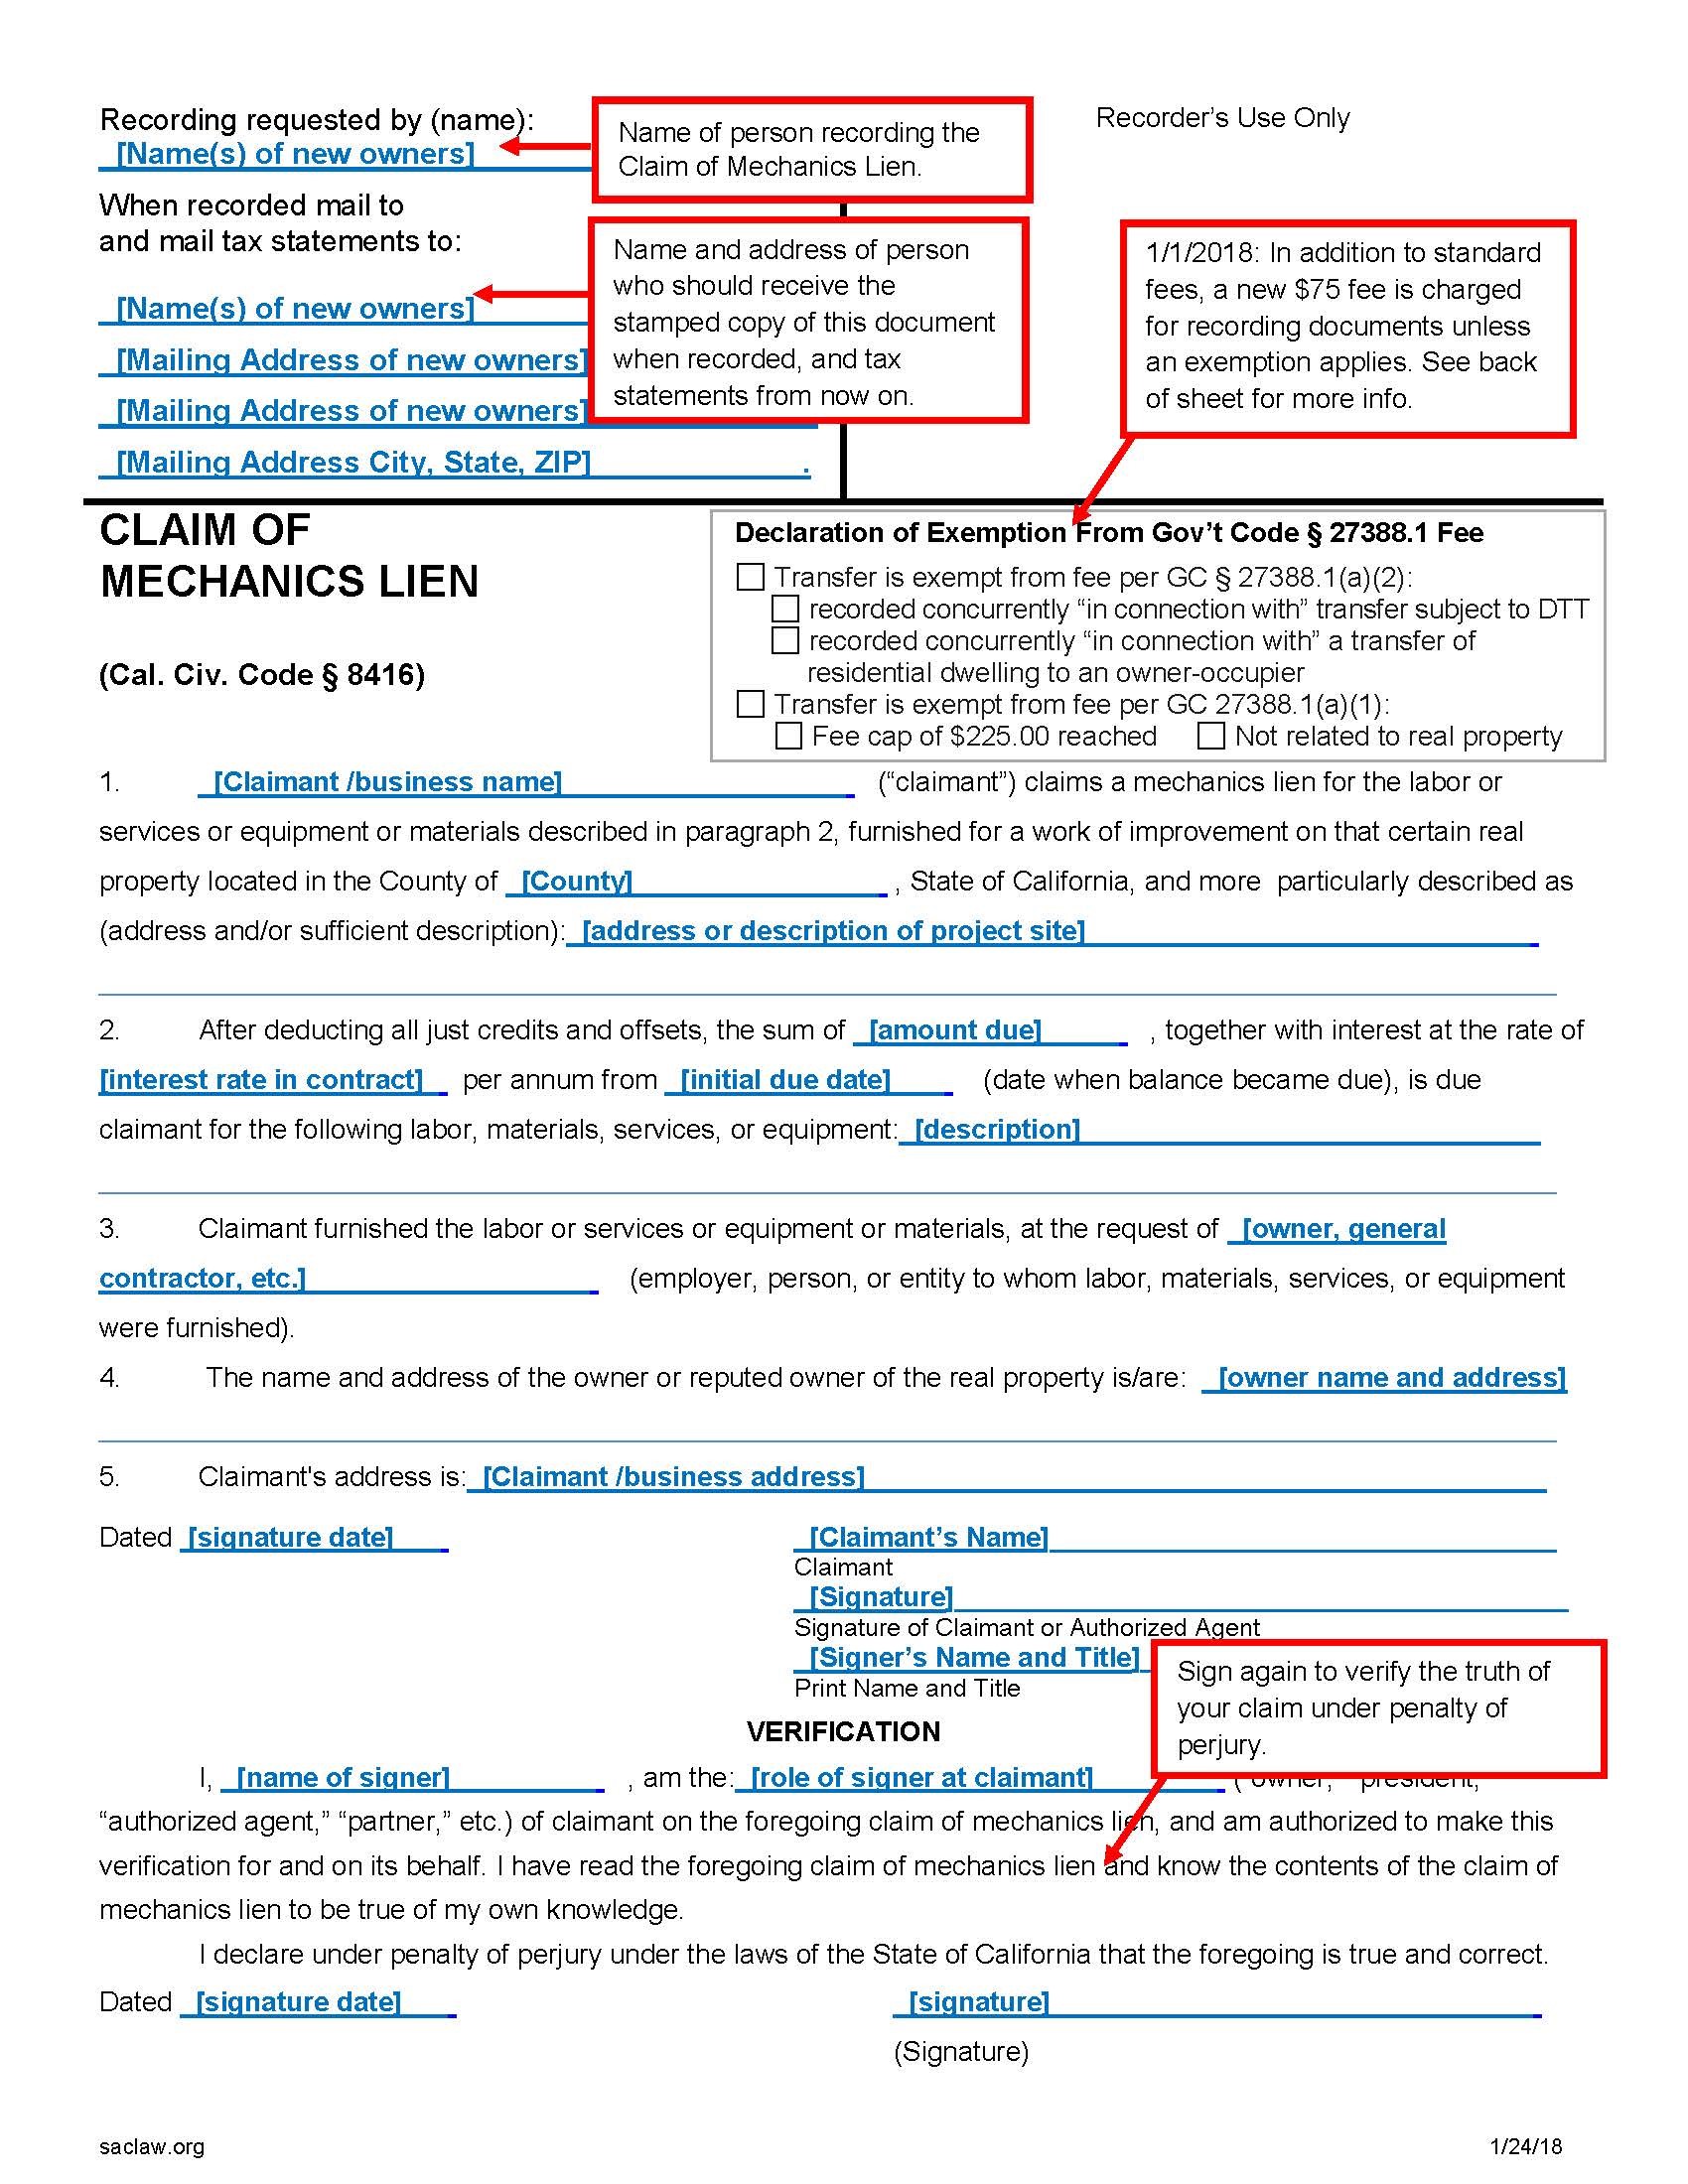 Sample filled-out Mechanics Lien (page 1), with instructions